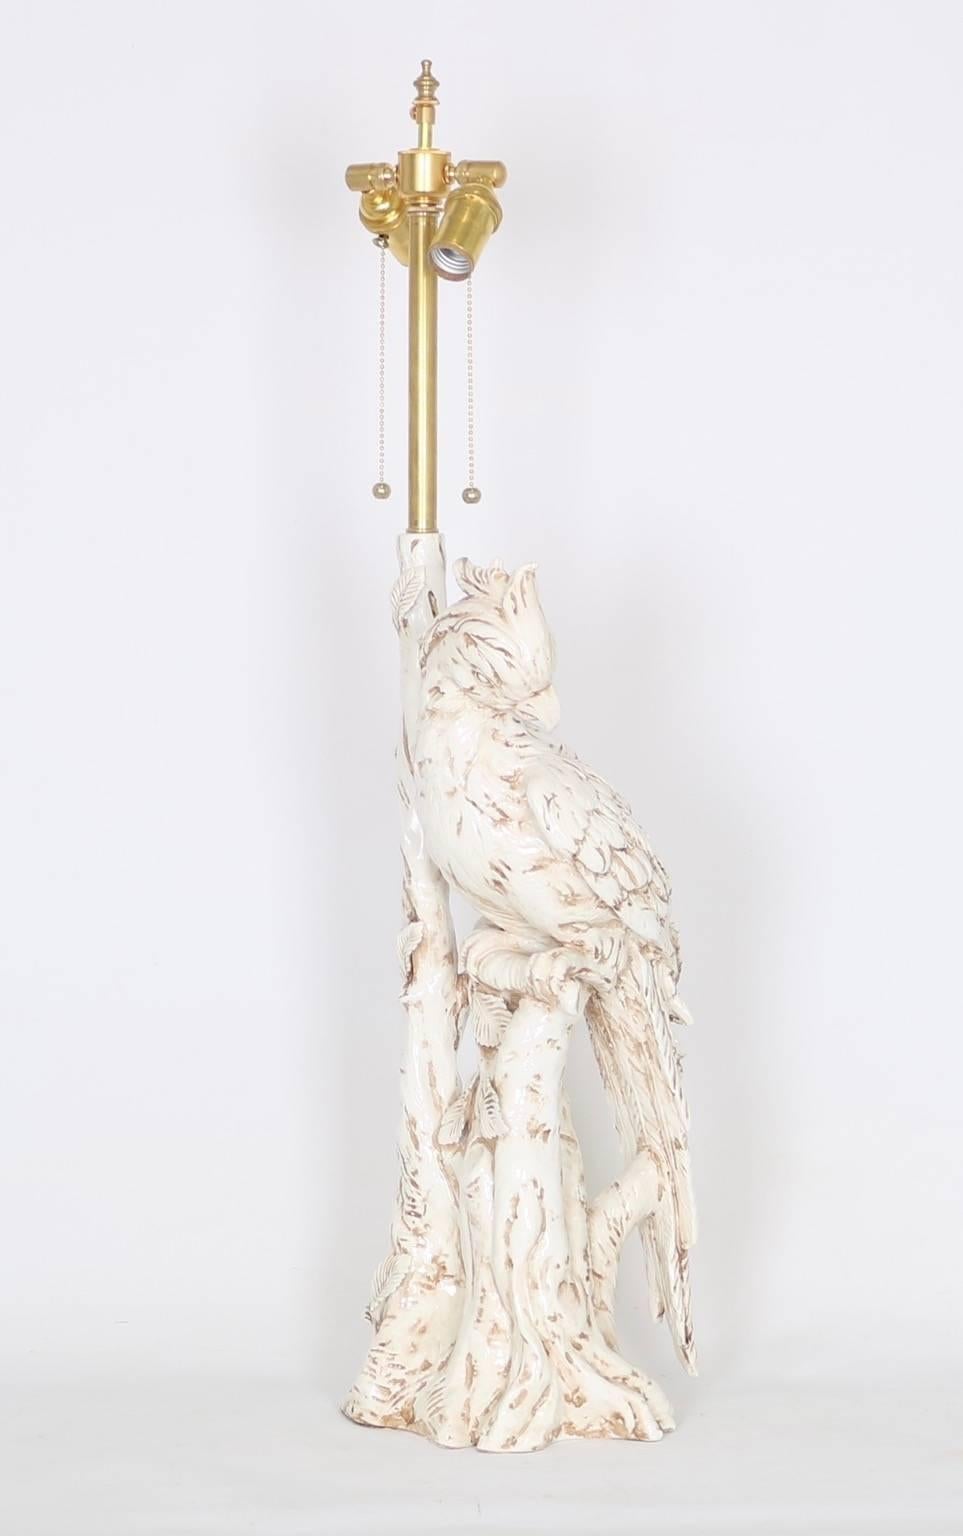 Italian Hollywood Regency majolica parrot-form lamp in white. There are two available (price is per item). Each lamp is fully restored with all new wiring and hardware including a double socket cluster. 

The noted height is to the finial and the